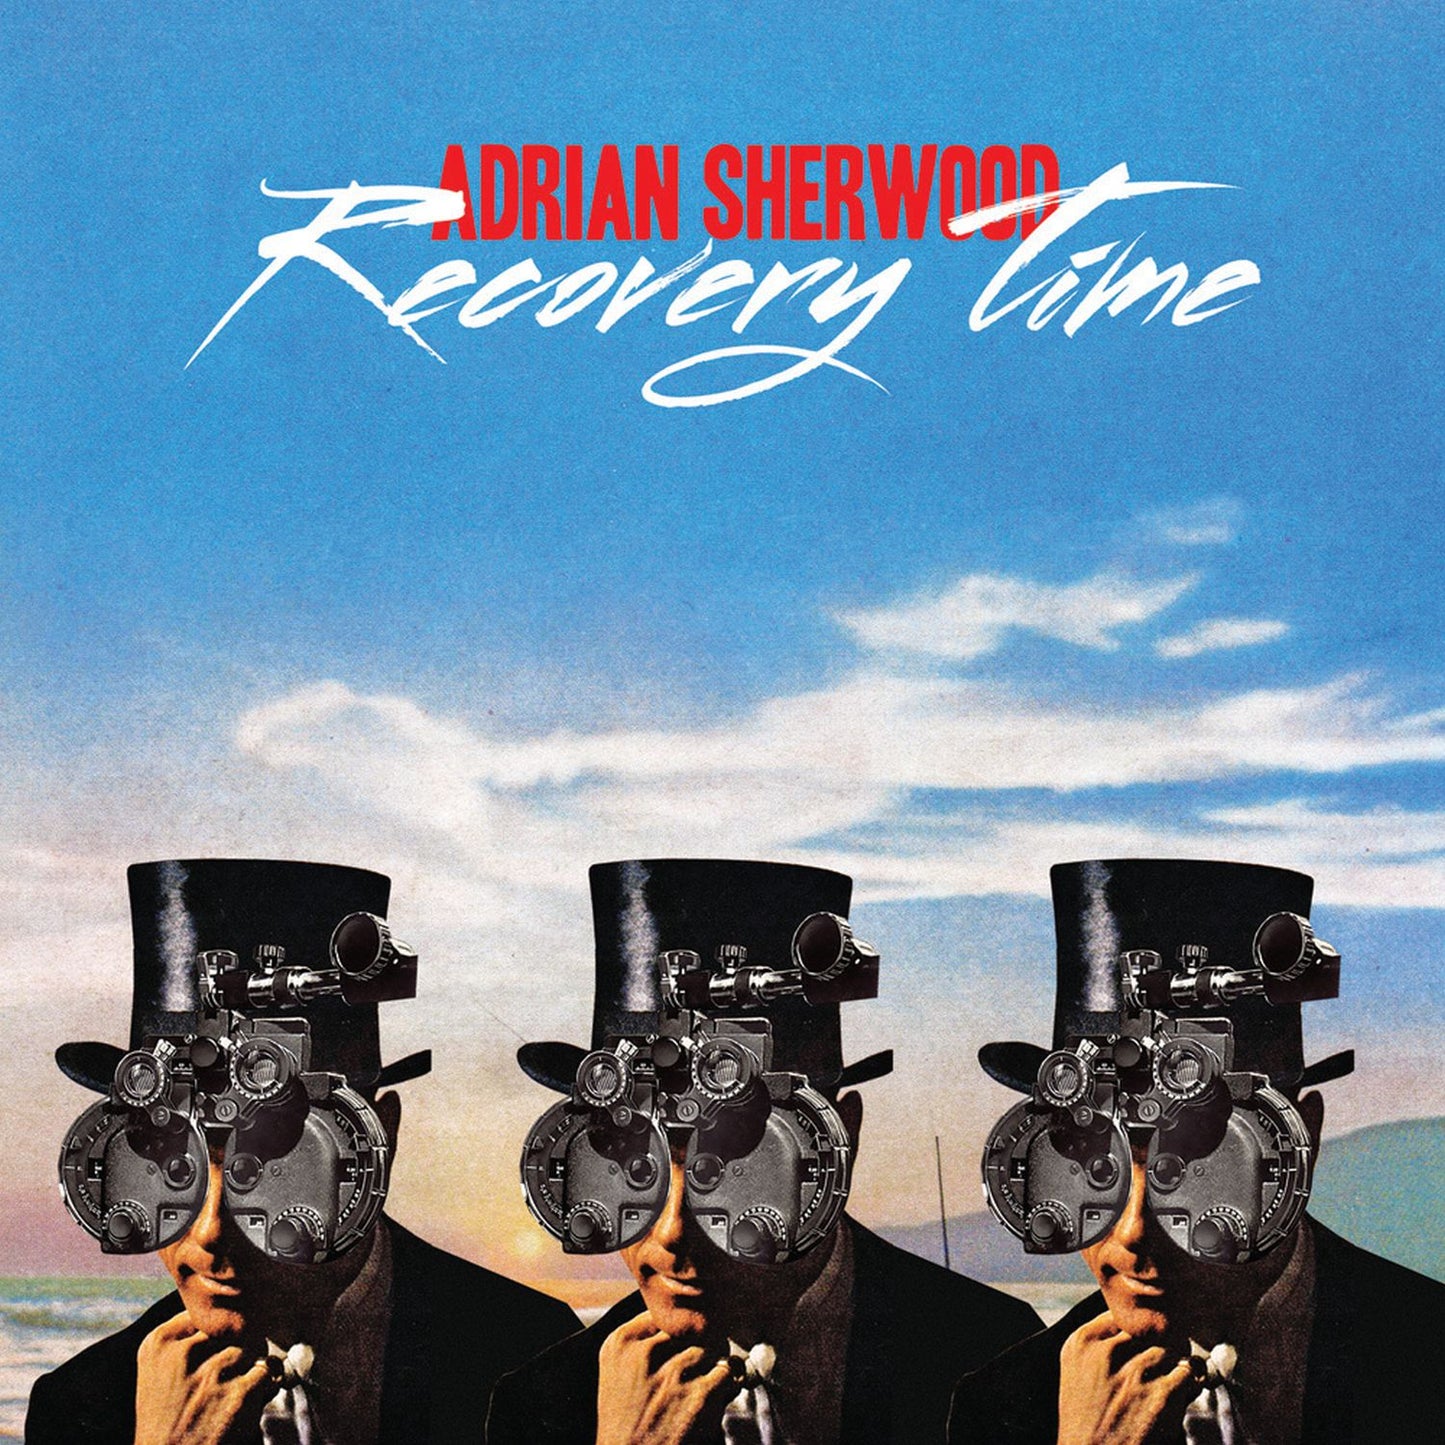 Adrian Sherwood - Recovery Time (Vinyl)